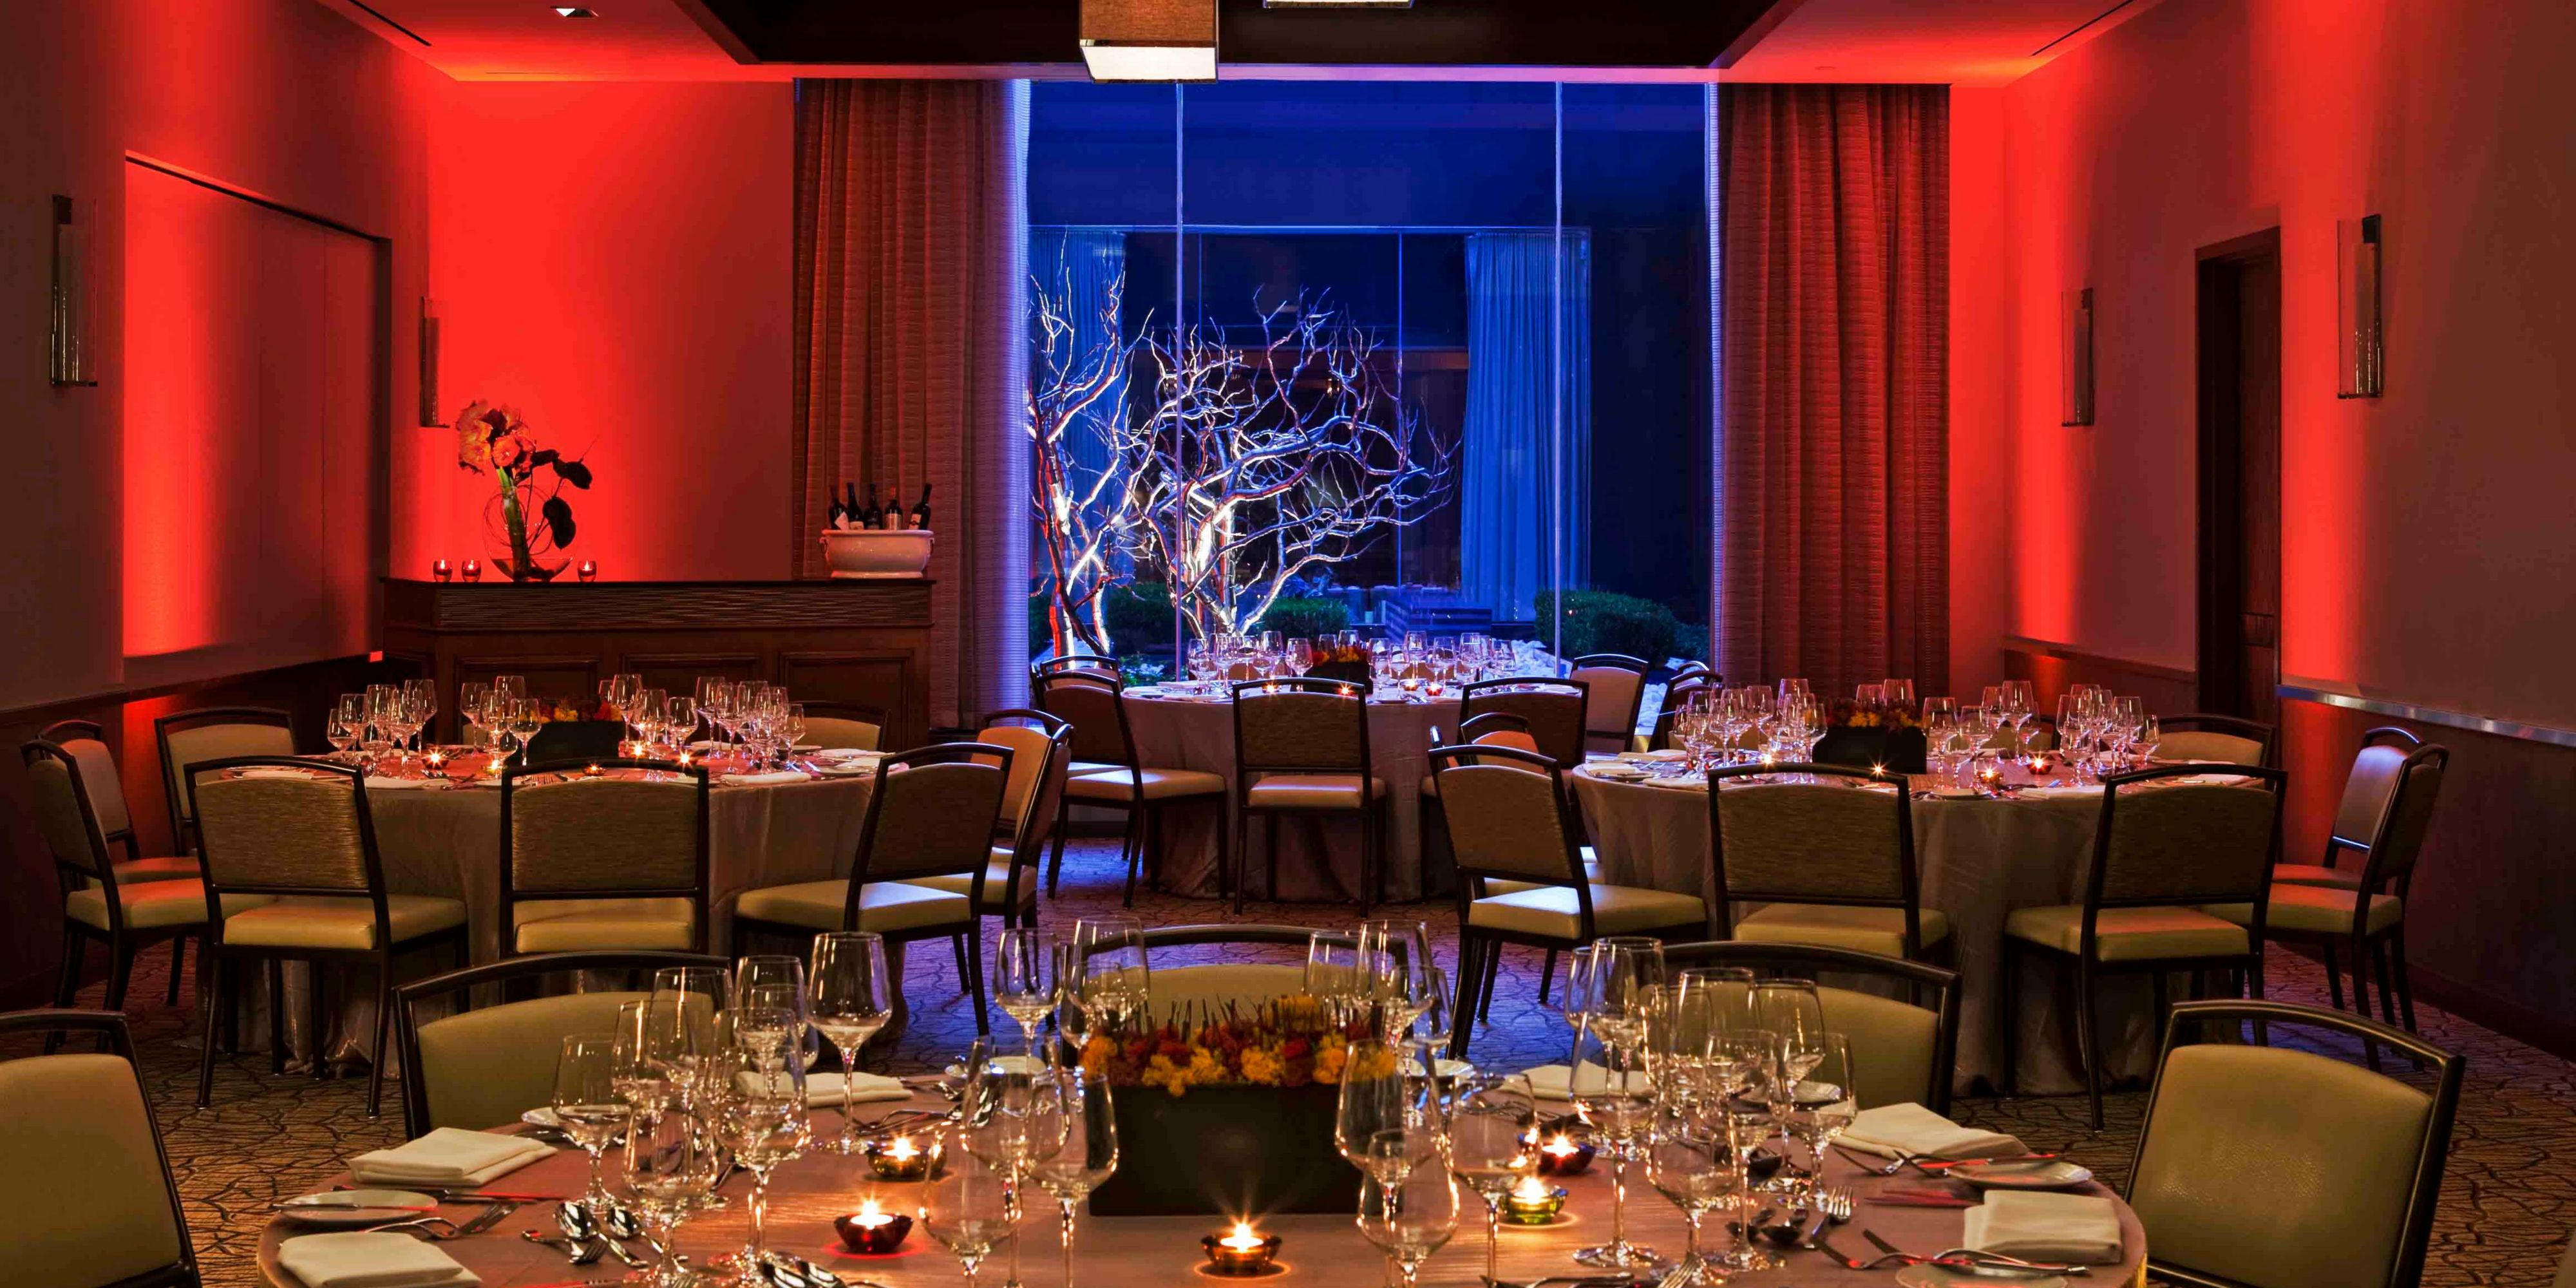 With 11,000 square feet of flexible meeting space, state-of-the-art audiovisual equipment, delectable on-site catering options, InterContinental® New York Times Square is the ideal venue for your next signature event, or conference. Celebrate a holiday party or special occasion at our luxurious private dining rooms at The Stinger. 
